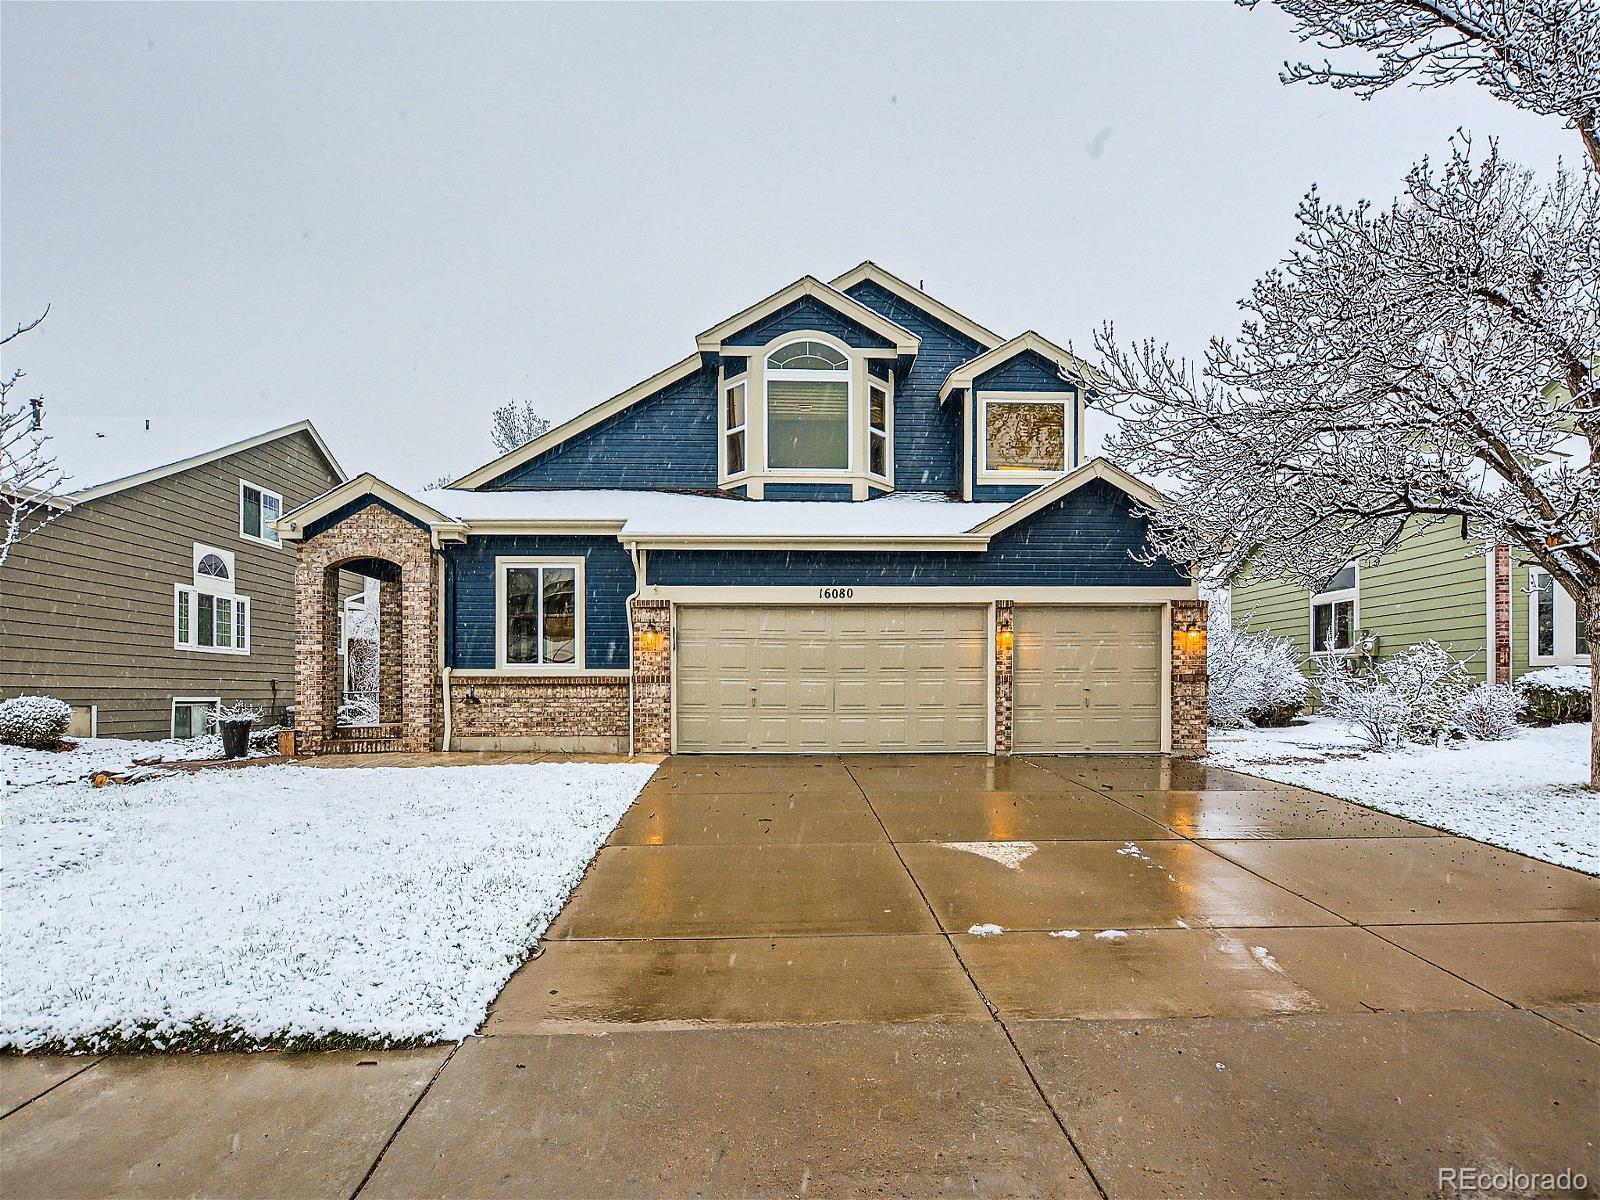 16080 W 69th Place, arvada MLS: 3863678 Beds: 4 Baths: 4 Price: $900,000